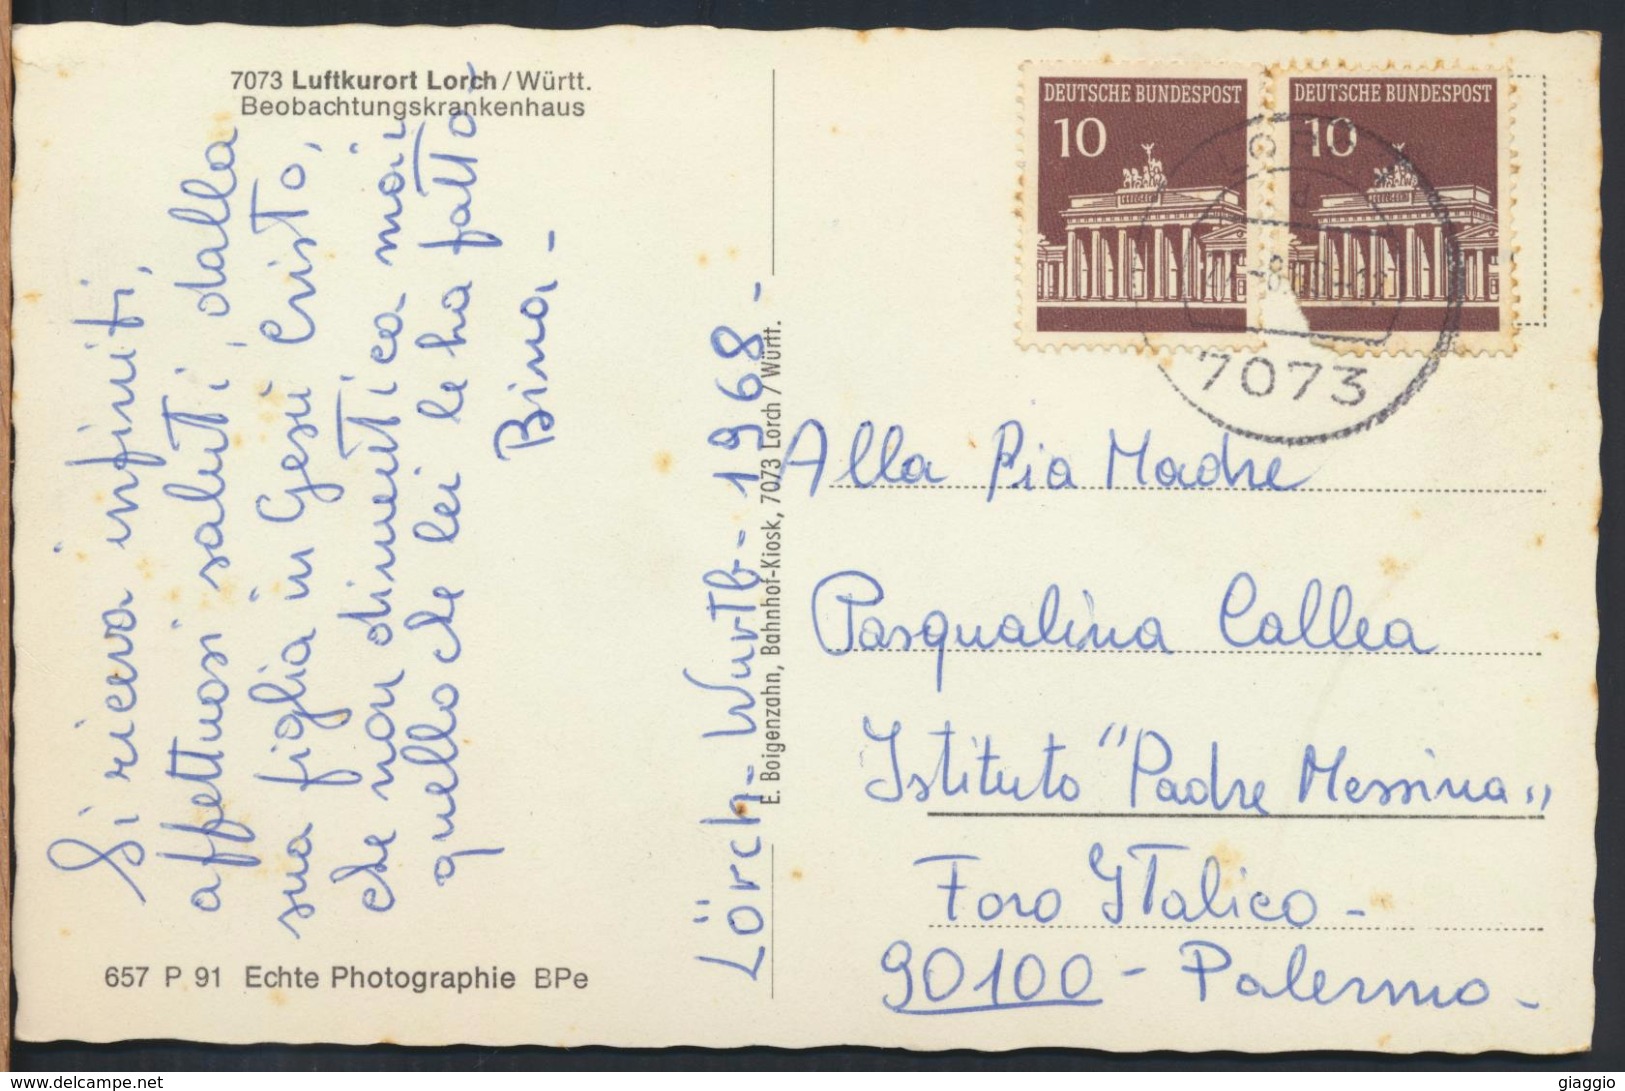 °°° 4214 - GERMANY - LUFTKURORT LORCH - 1968 With Stamps °°° - Lorch